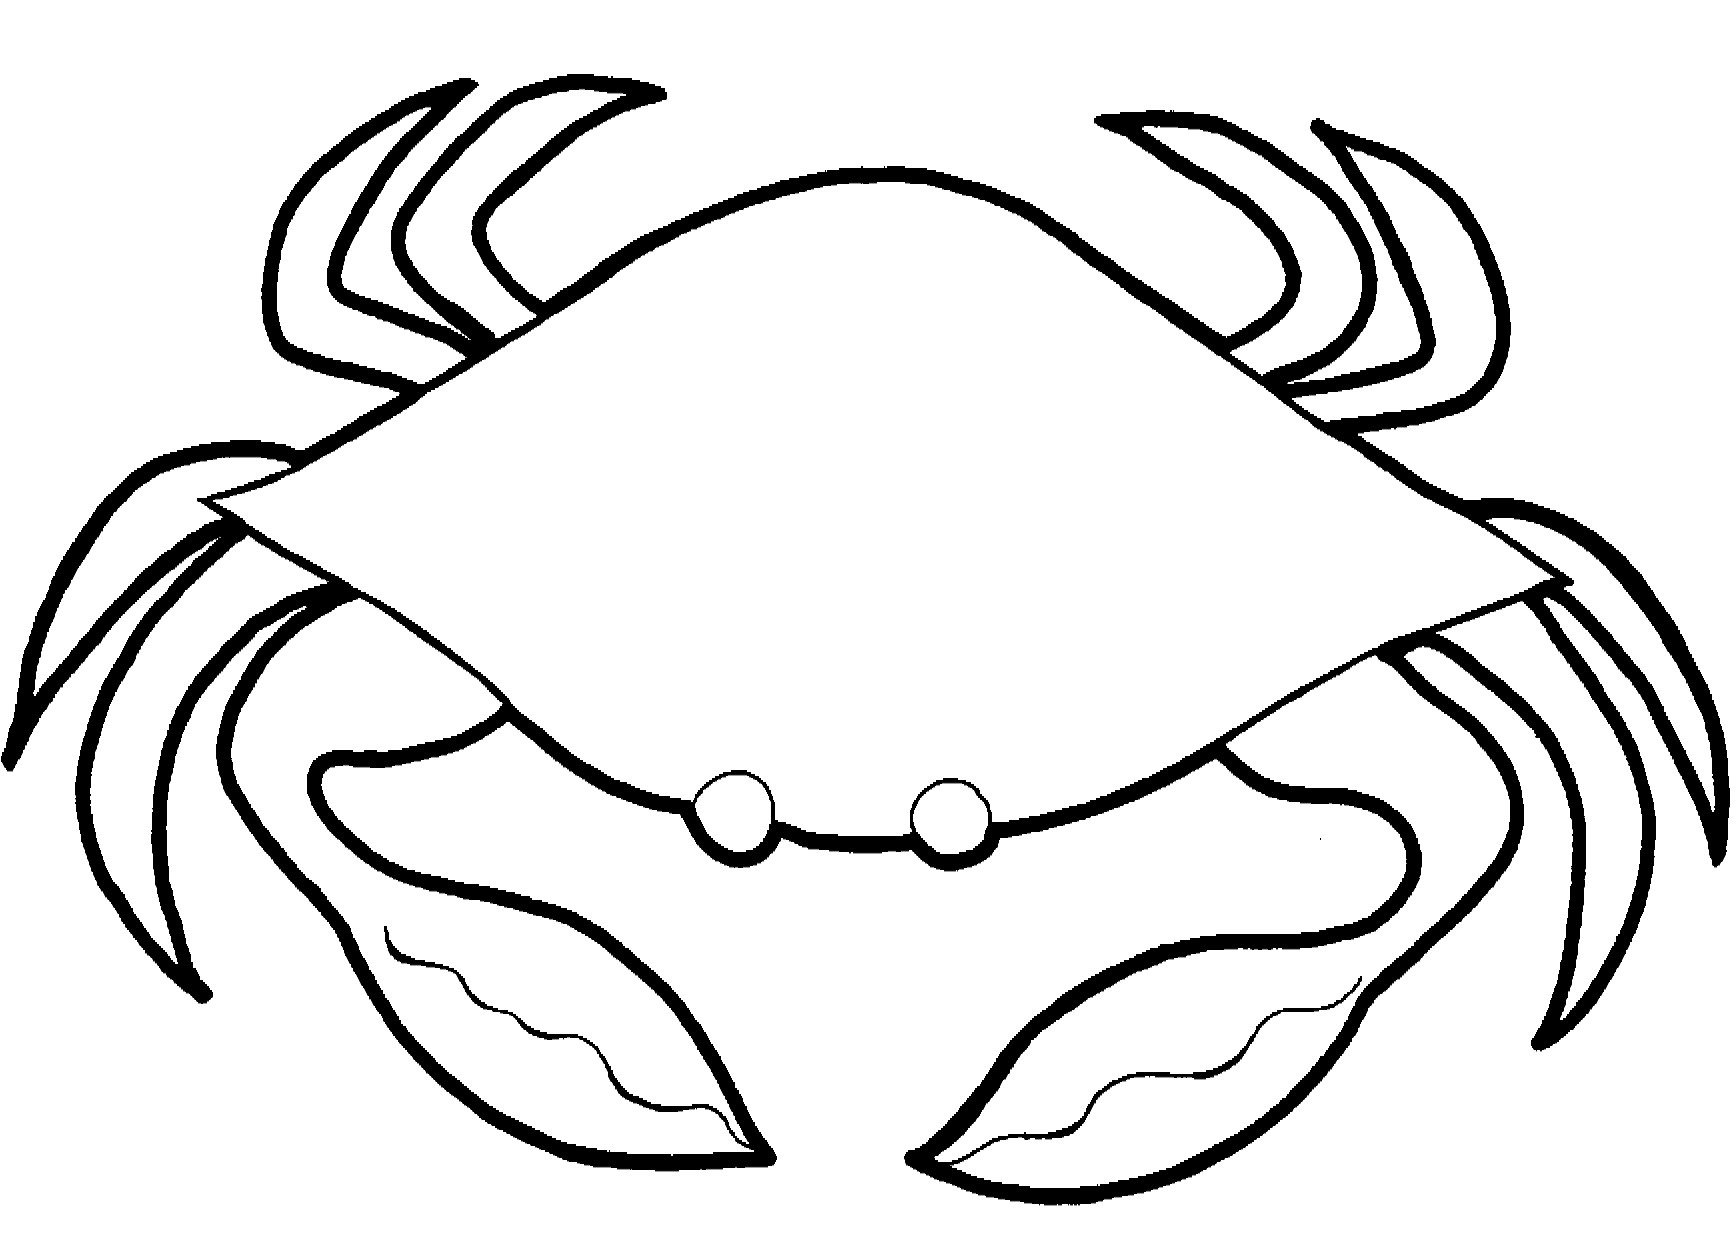 Black and White Coloring Page Crab Image